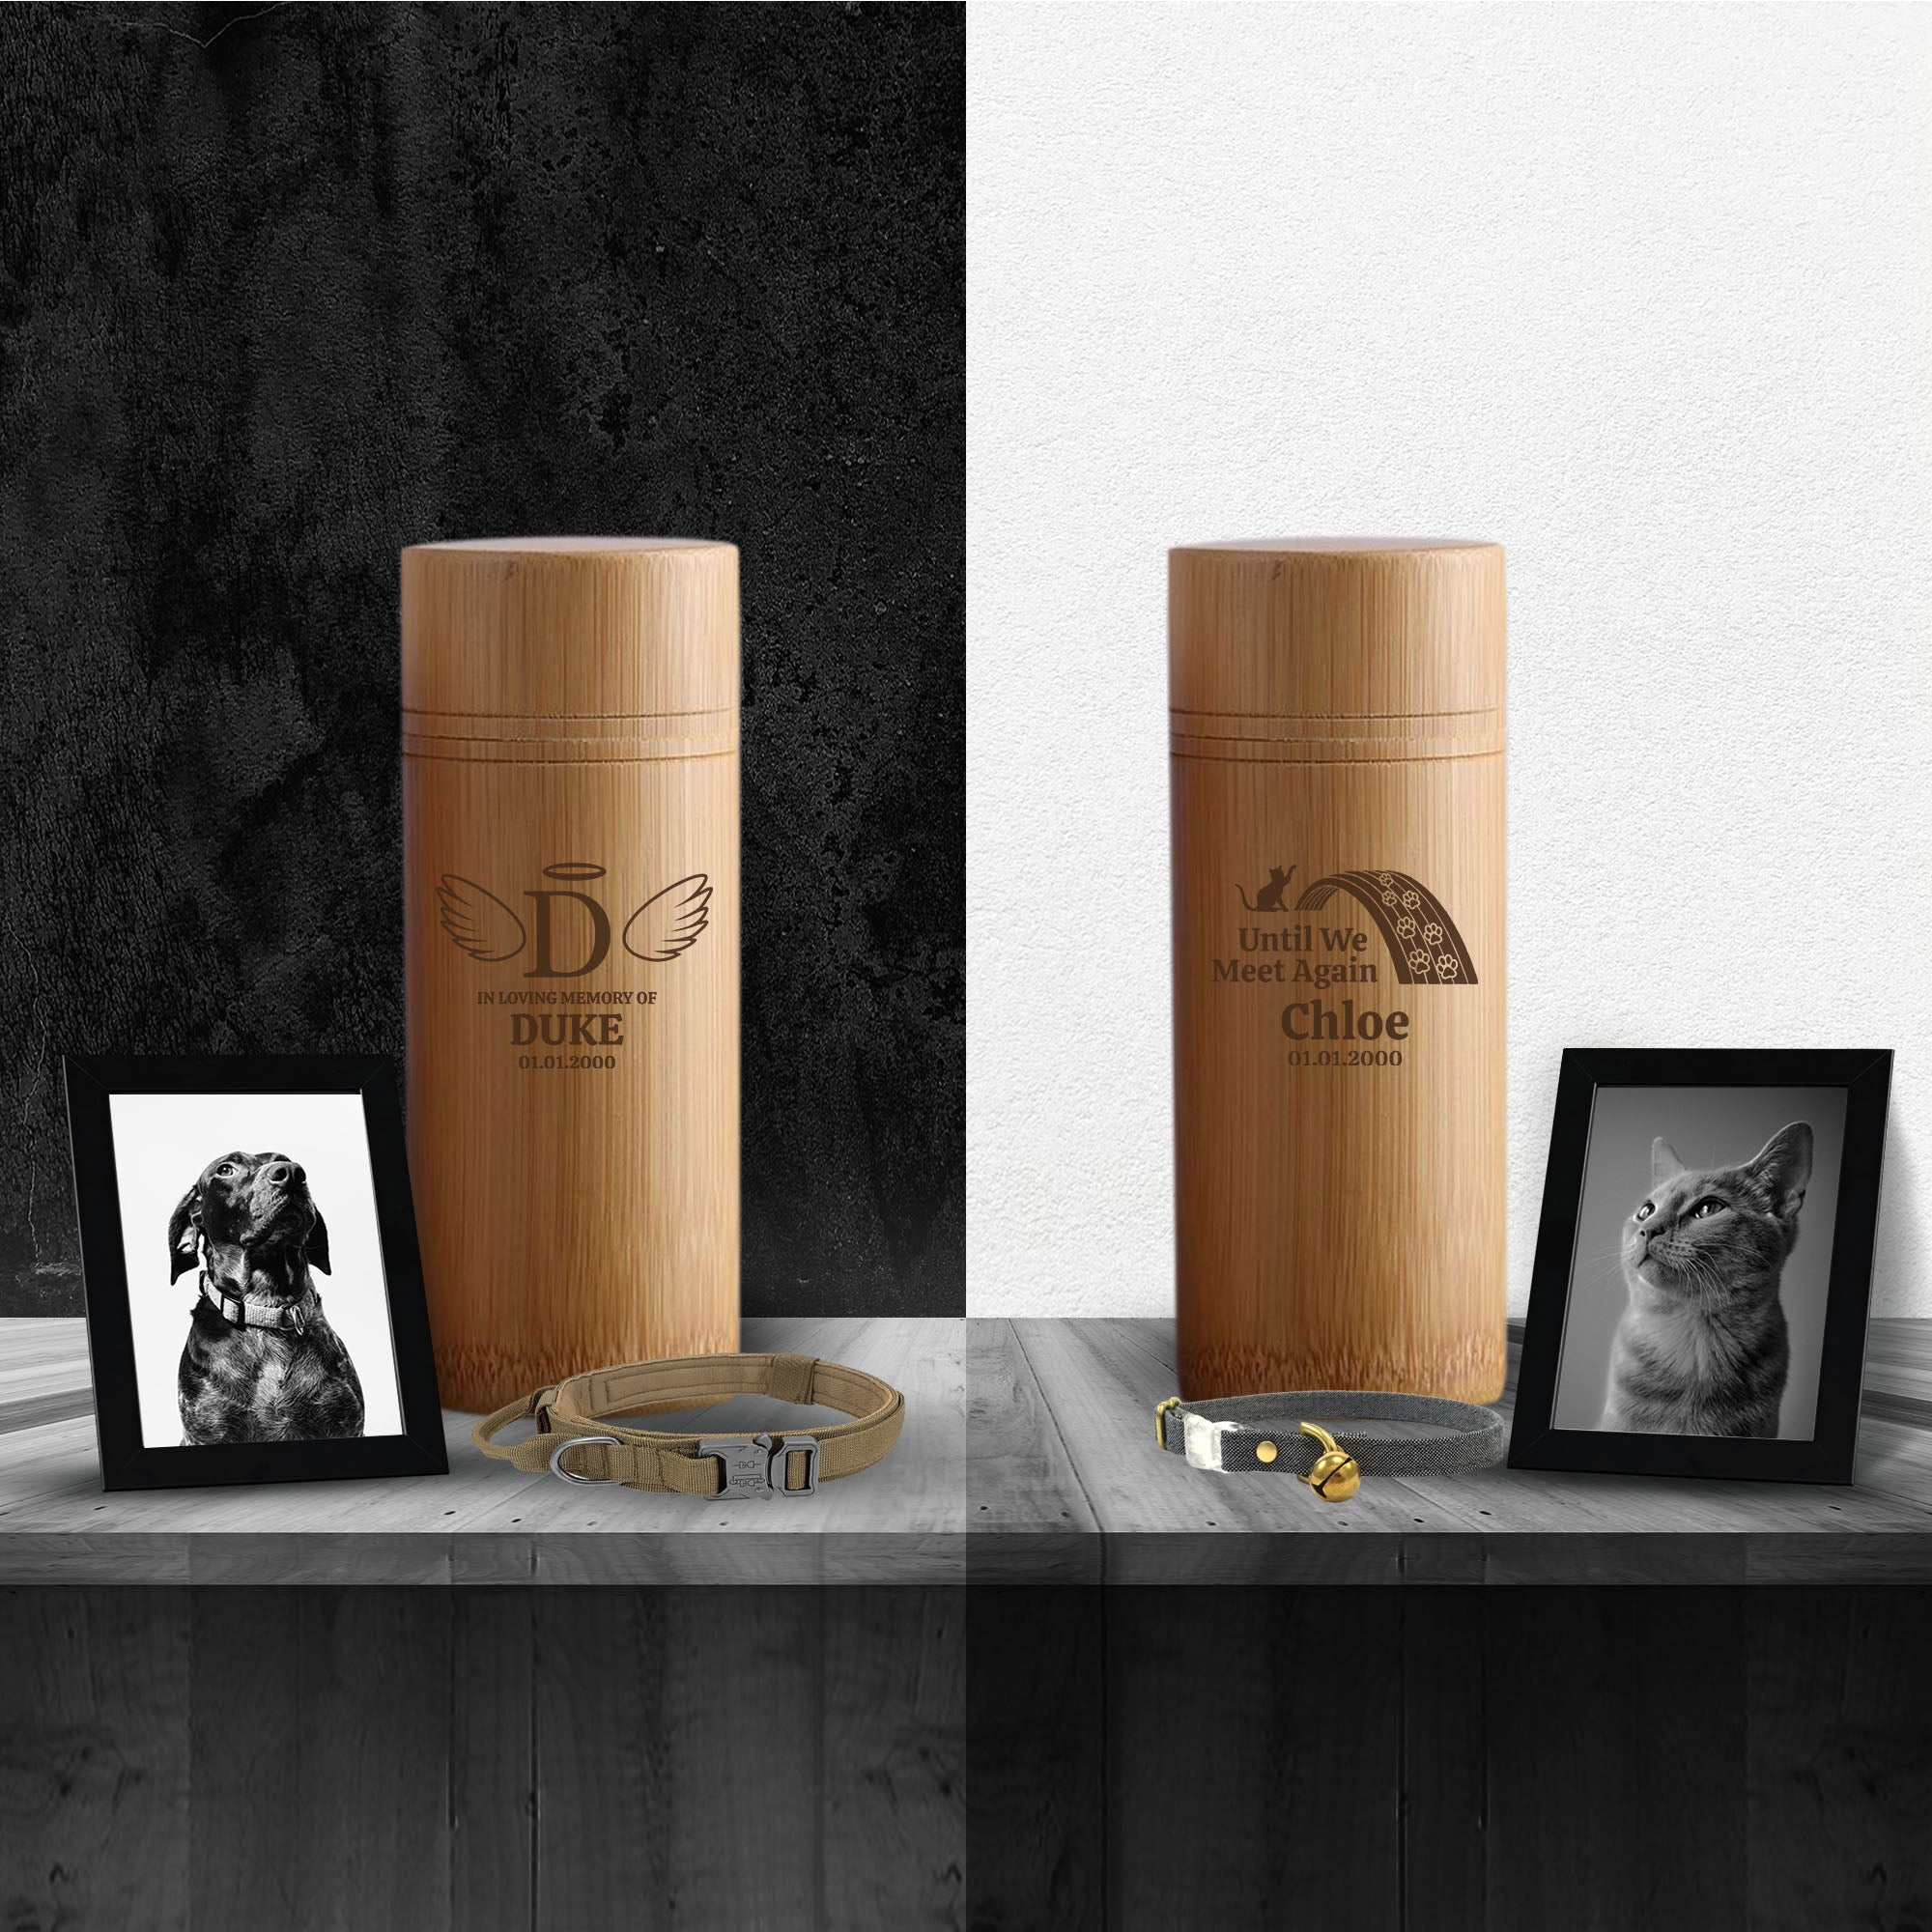 Personalized Custom Bamboo Tube Urn for Dog Pet Ashes: Environmentally Friendly Cremation Urn for Scattering, Burial, or Display Options - Pet Size up to 35 lbs